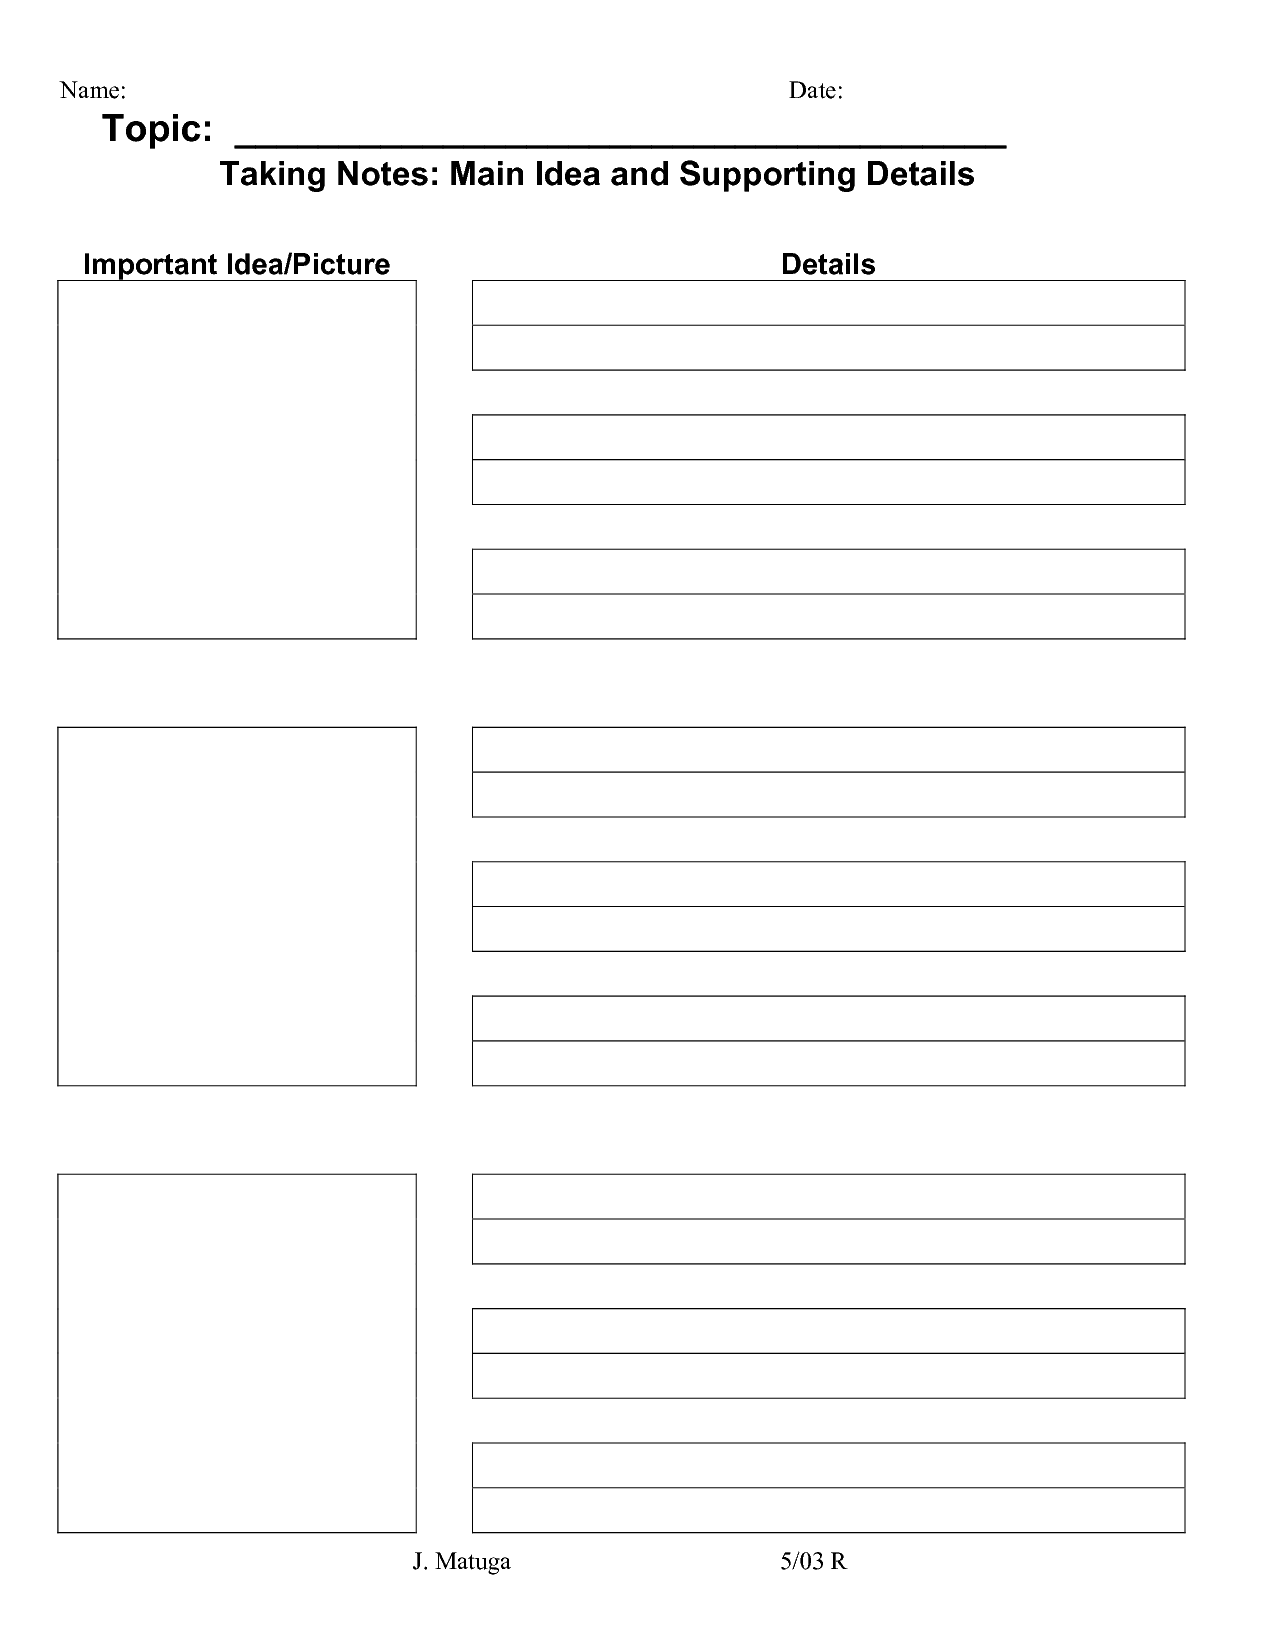 13-best-images-of-idea-supporting-and-main-worksheets-details-practice